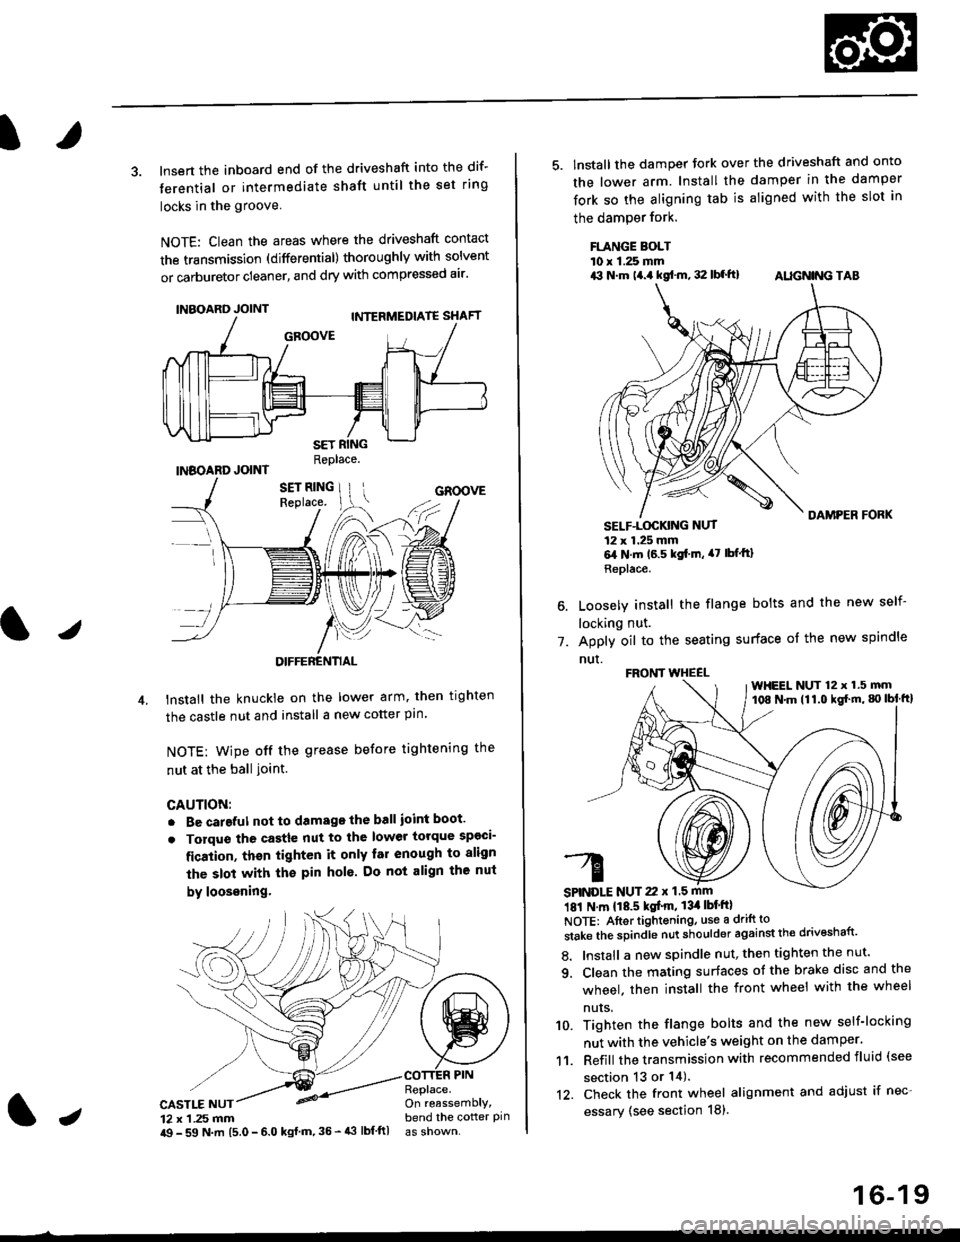 HONDA CIVIC 1998 6.G Workshop Manual 3. lnsert the inboard end of the driveshaft into the dif-
terential or intermediate shaft until the set ring
locks in the groove
NOTE: Clean the areas where the driveshaft contact
the transmission (di